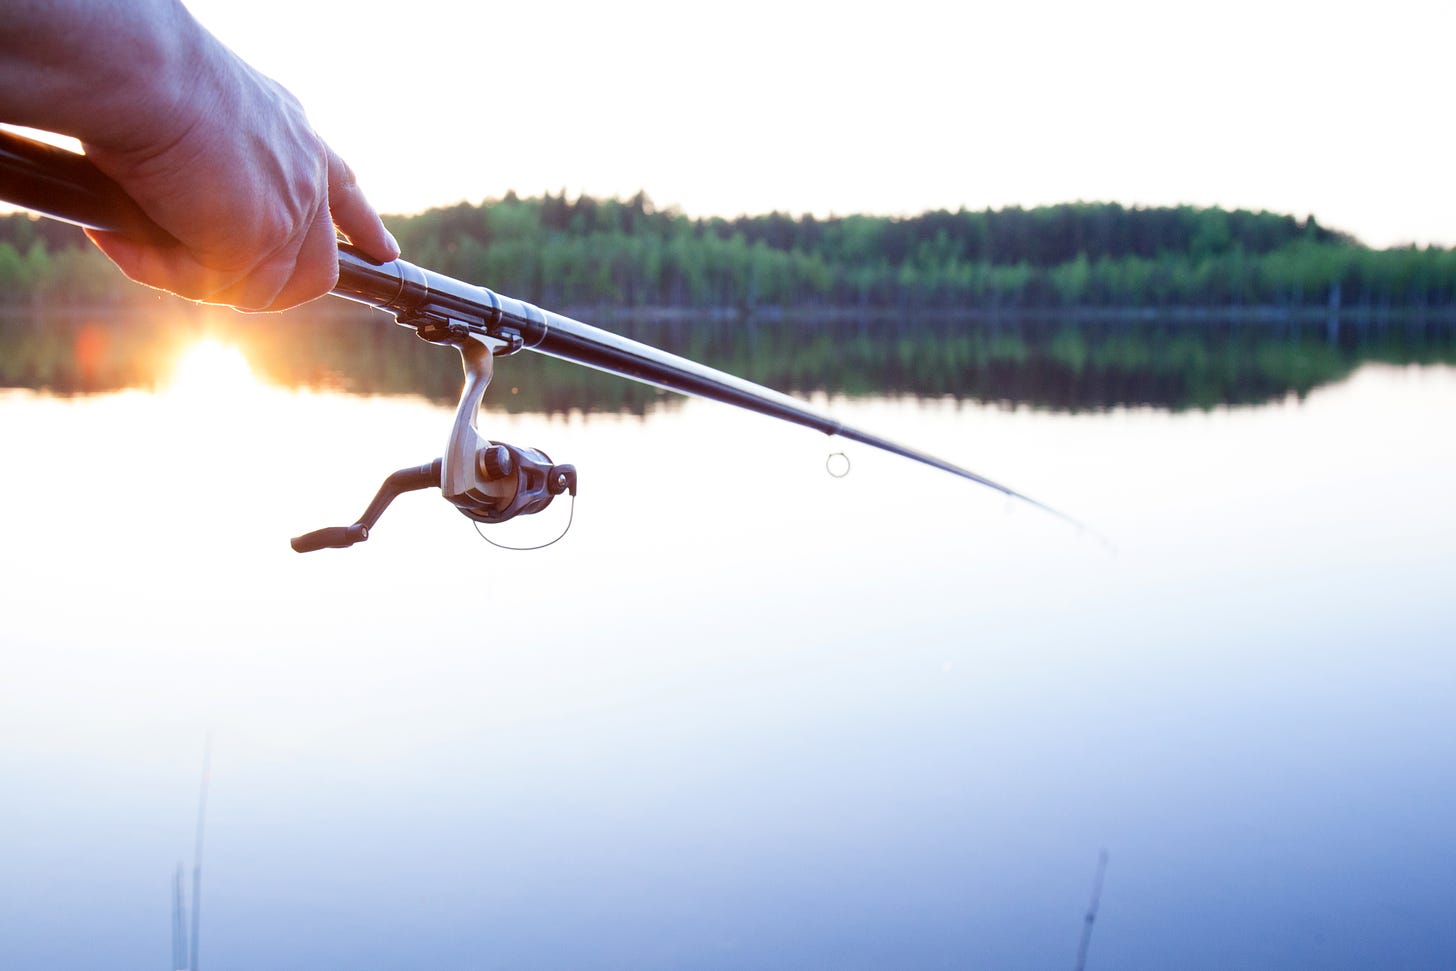 Person's hand holding a fishing pole in front of a large, still lake with a tree line and the sun reflecting on the water